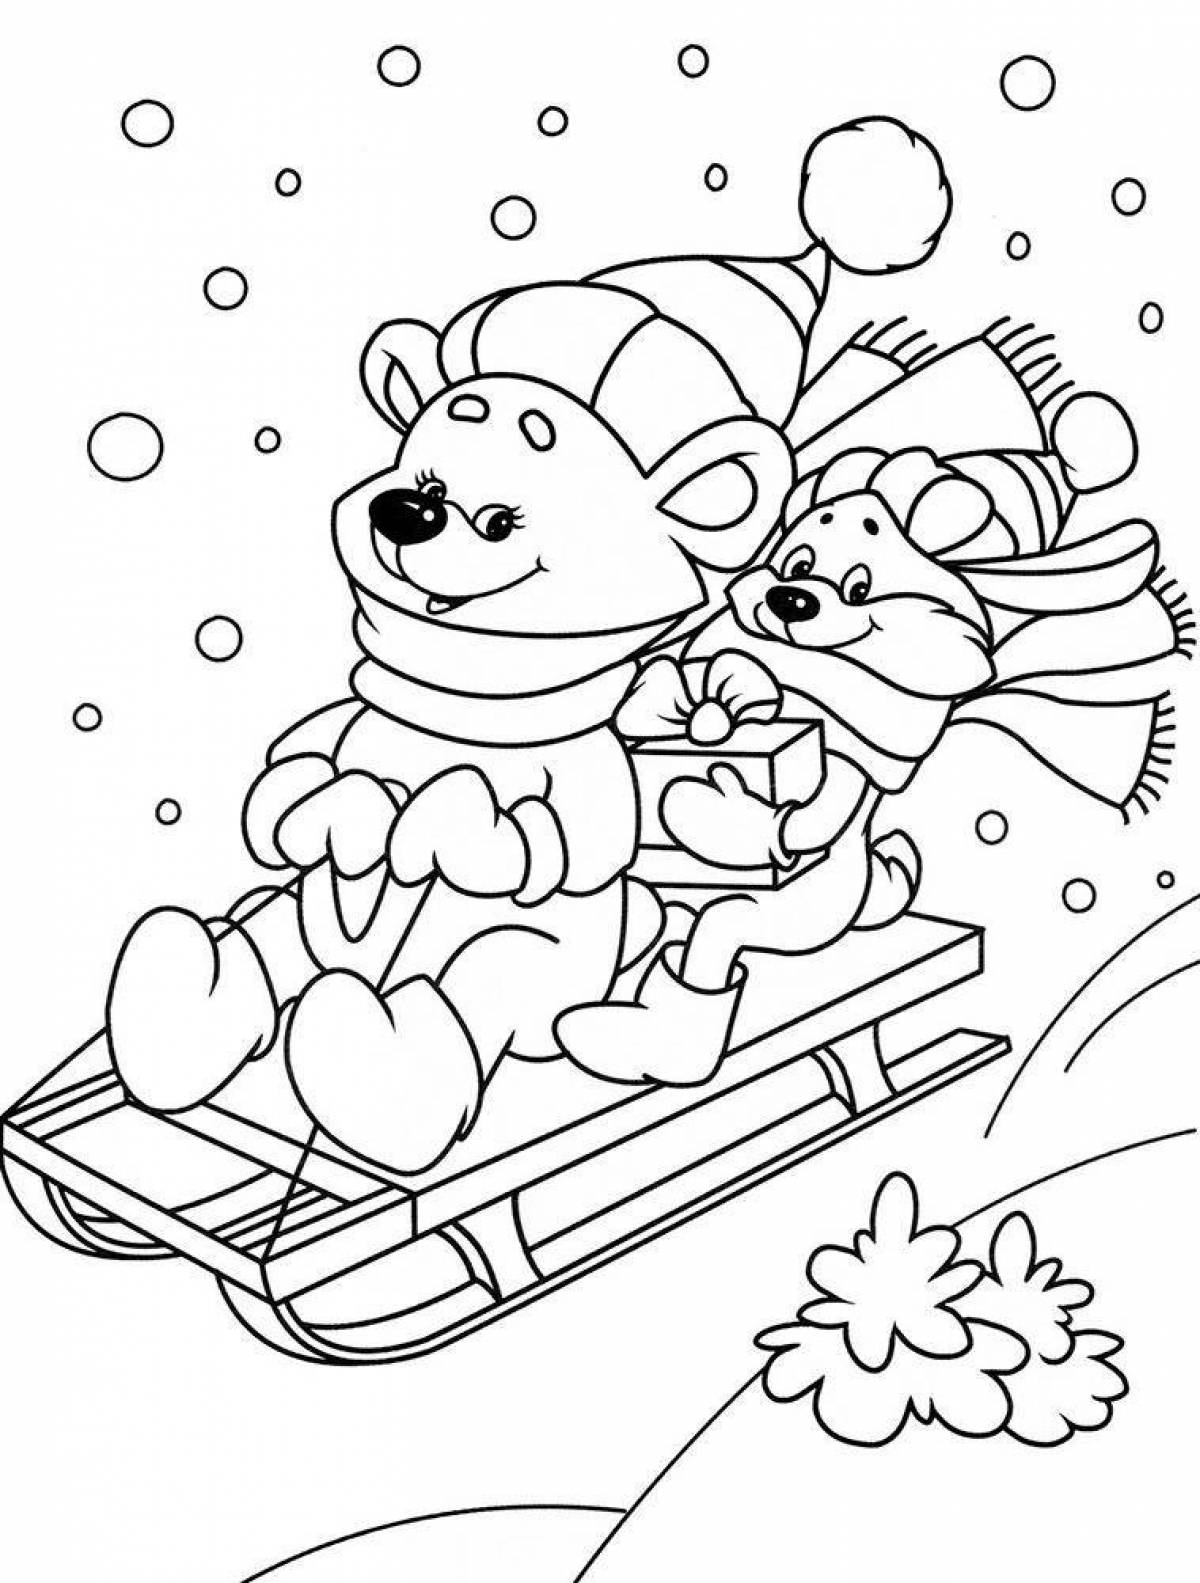 Merry winter coloring for children 4-6 years old